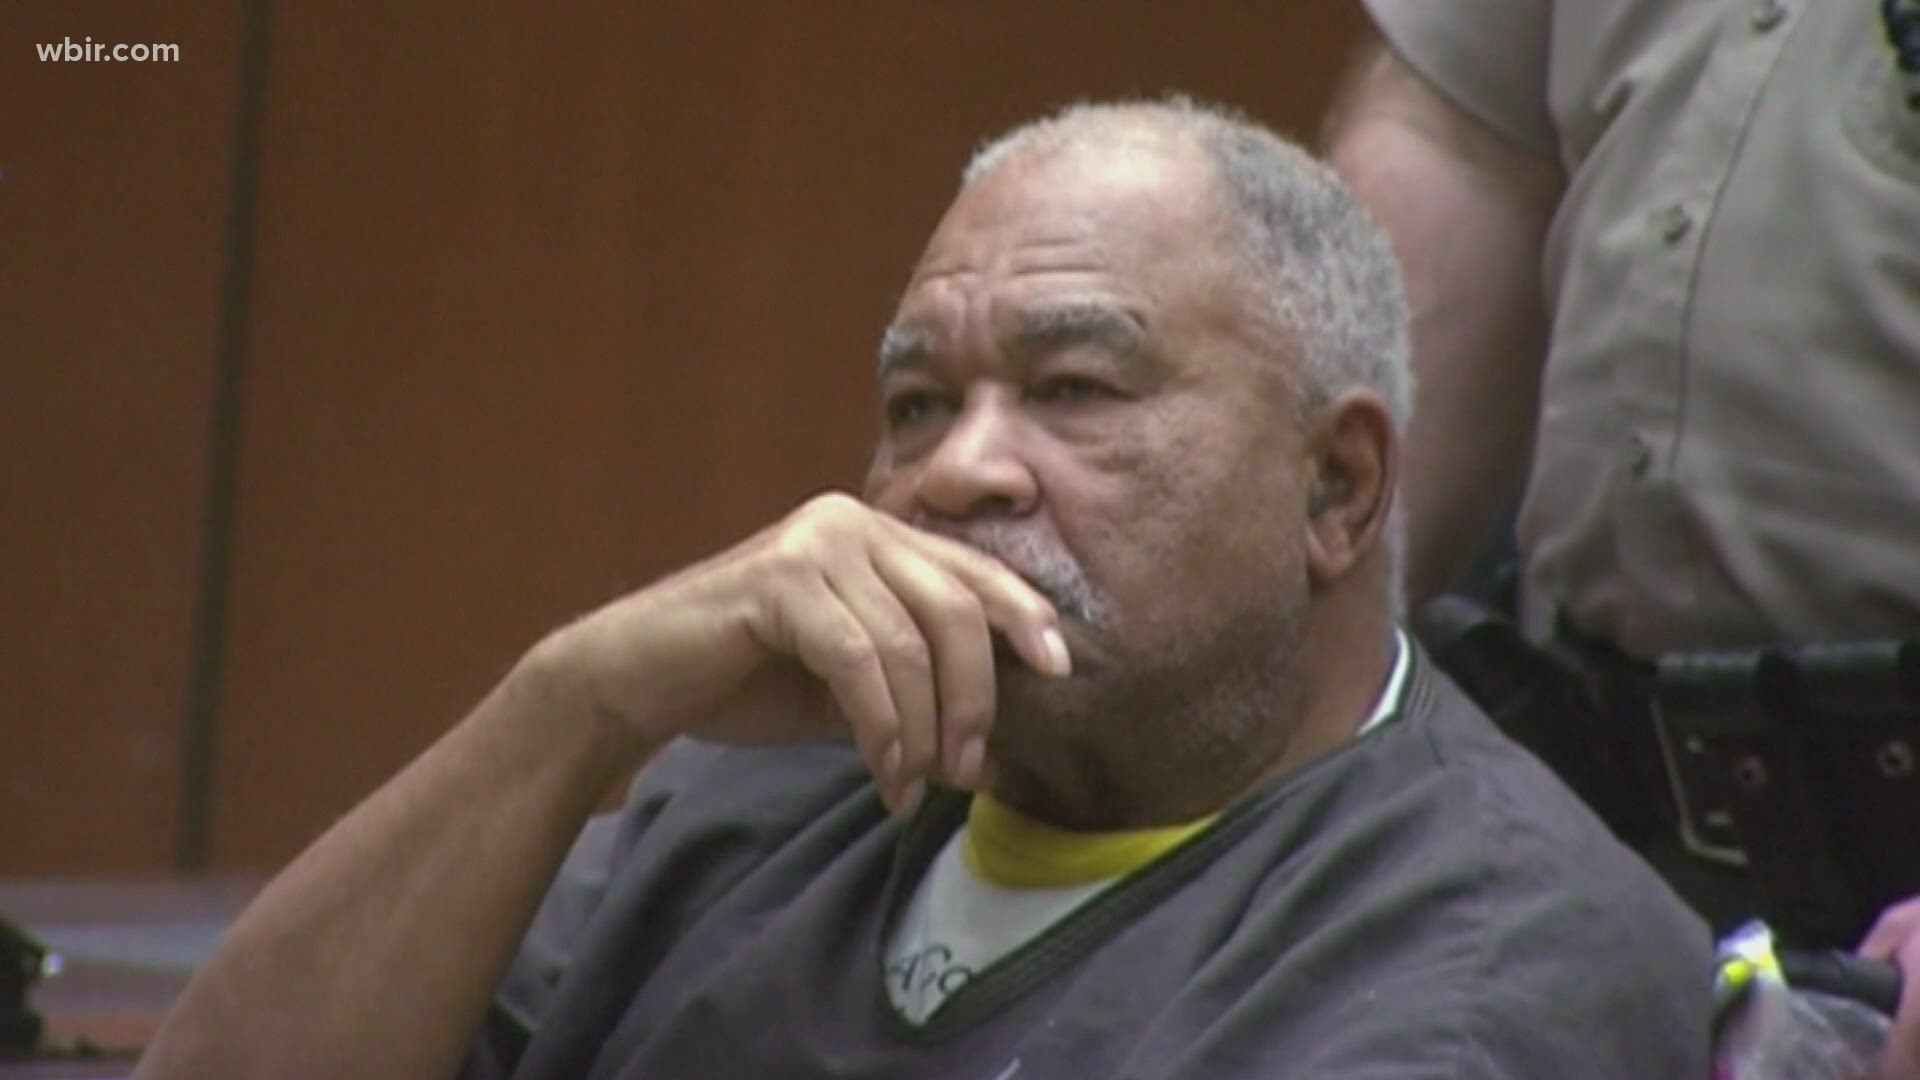 Samuel Little confessed to killing 93 people between 1970 and 2005.